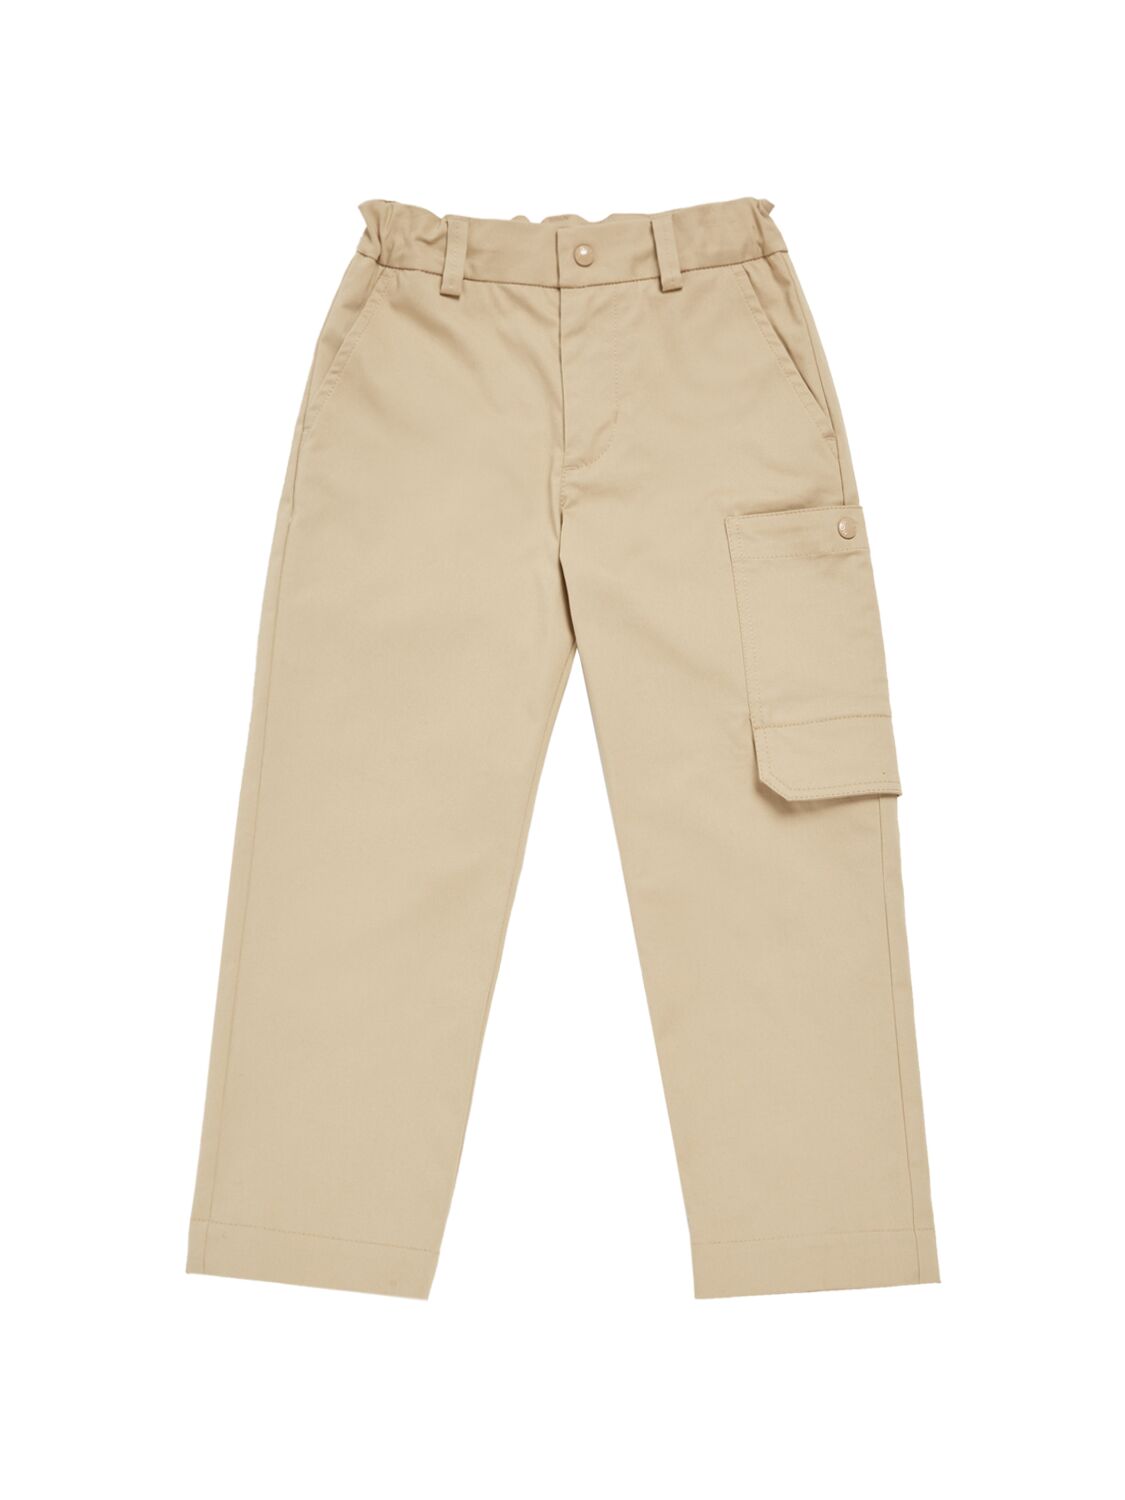 Image of Cotton Stretch Twill Pants